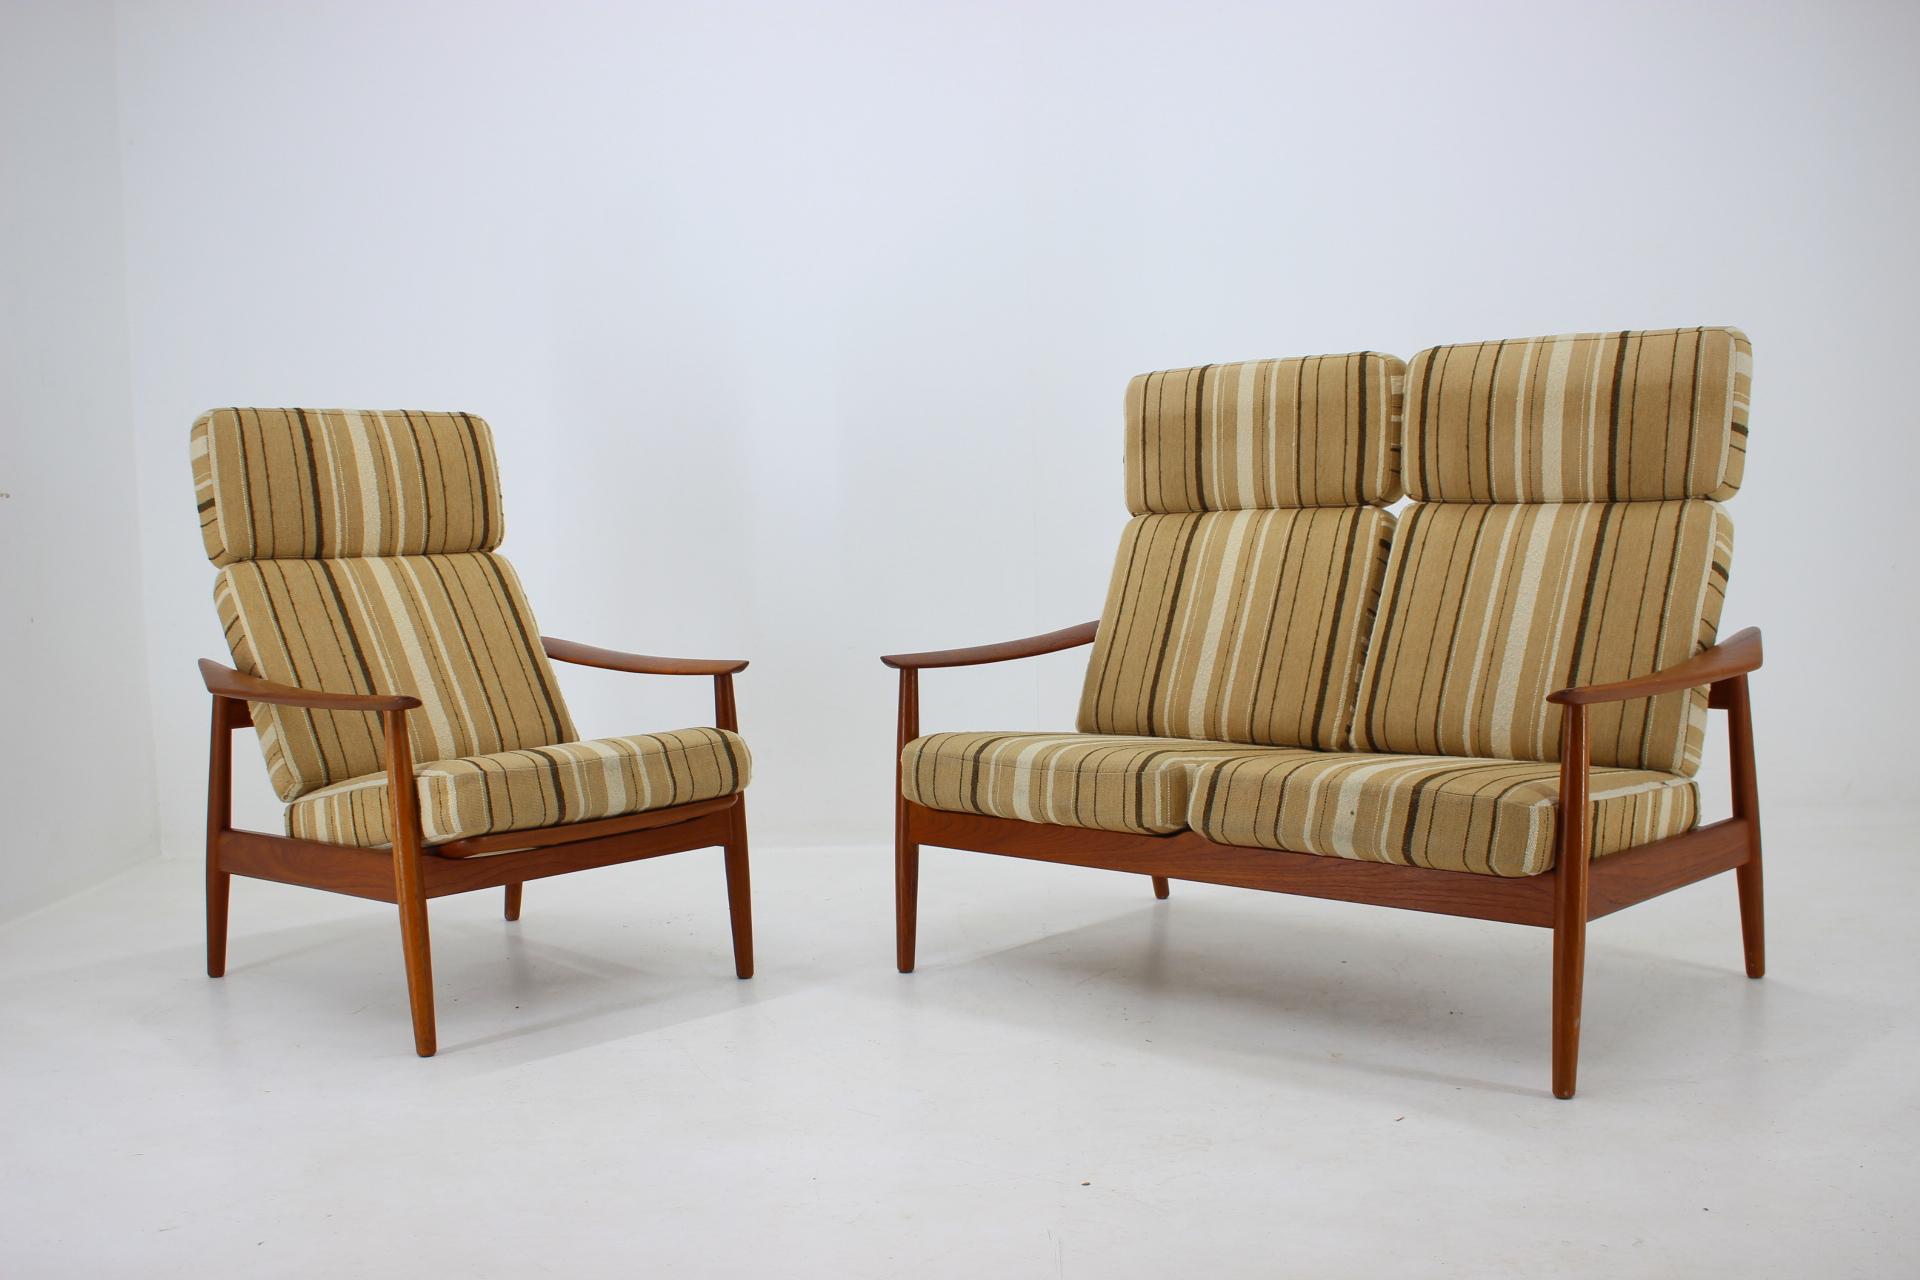 - One armchair and one two seat sofa
- Rare original set
- Teak
- Very elegant and comfortable
- Marked
- High back.